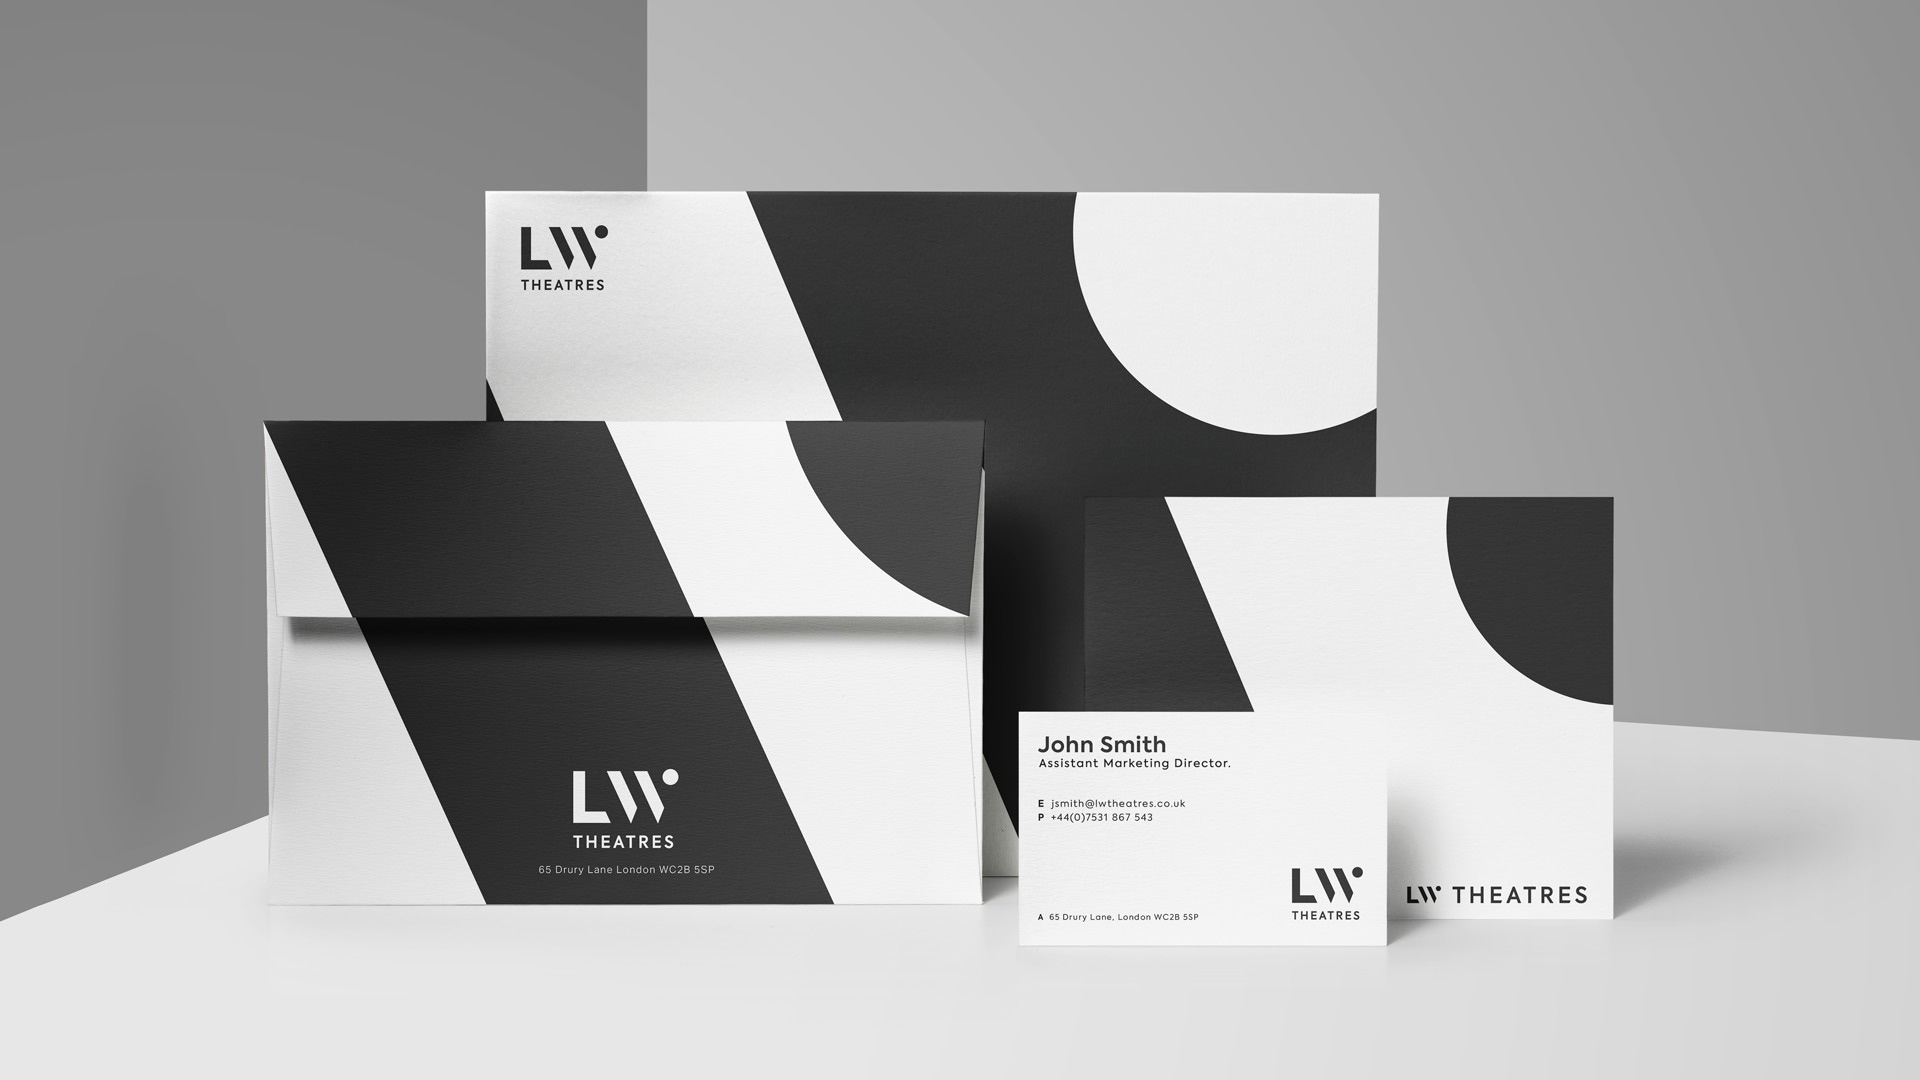 New Logo and Identity for LW Theatres by Elmwood